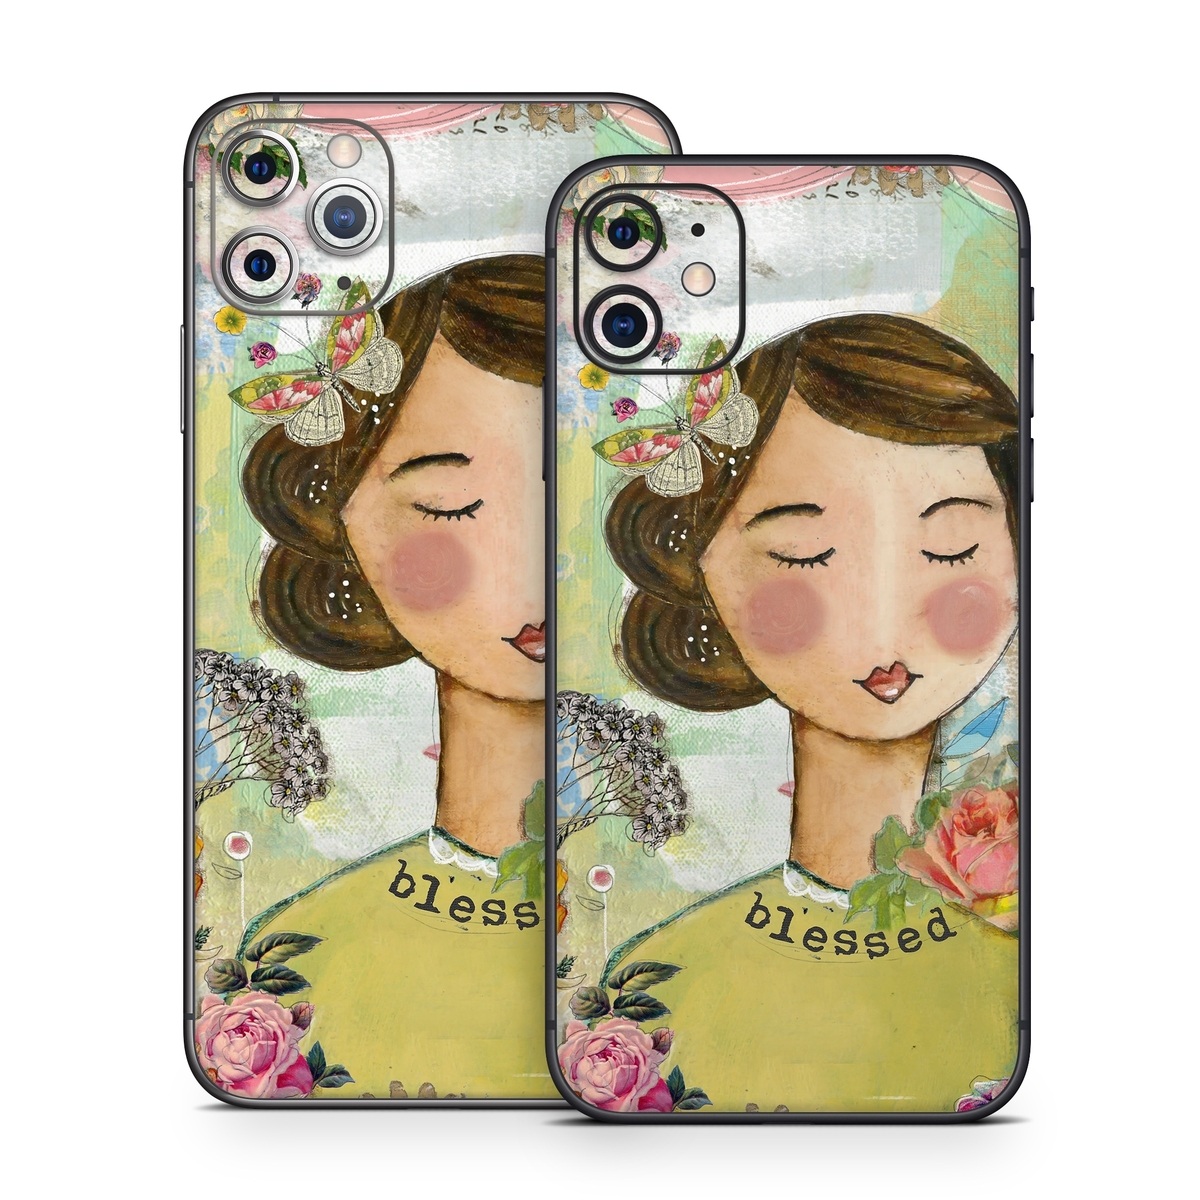 iPhone 11 Series Skin design of Illustration, Cheek, Art, Watercolor paint, Retro style, Painting, Plant, Flower, Fashion illustration, Fictional character, with pink, green, yellow, white, red, blue colors